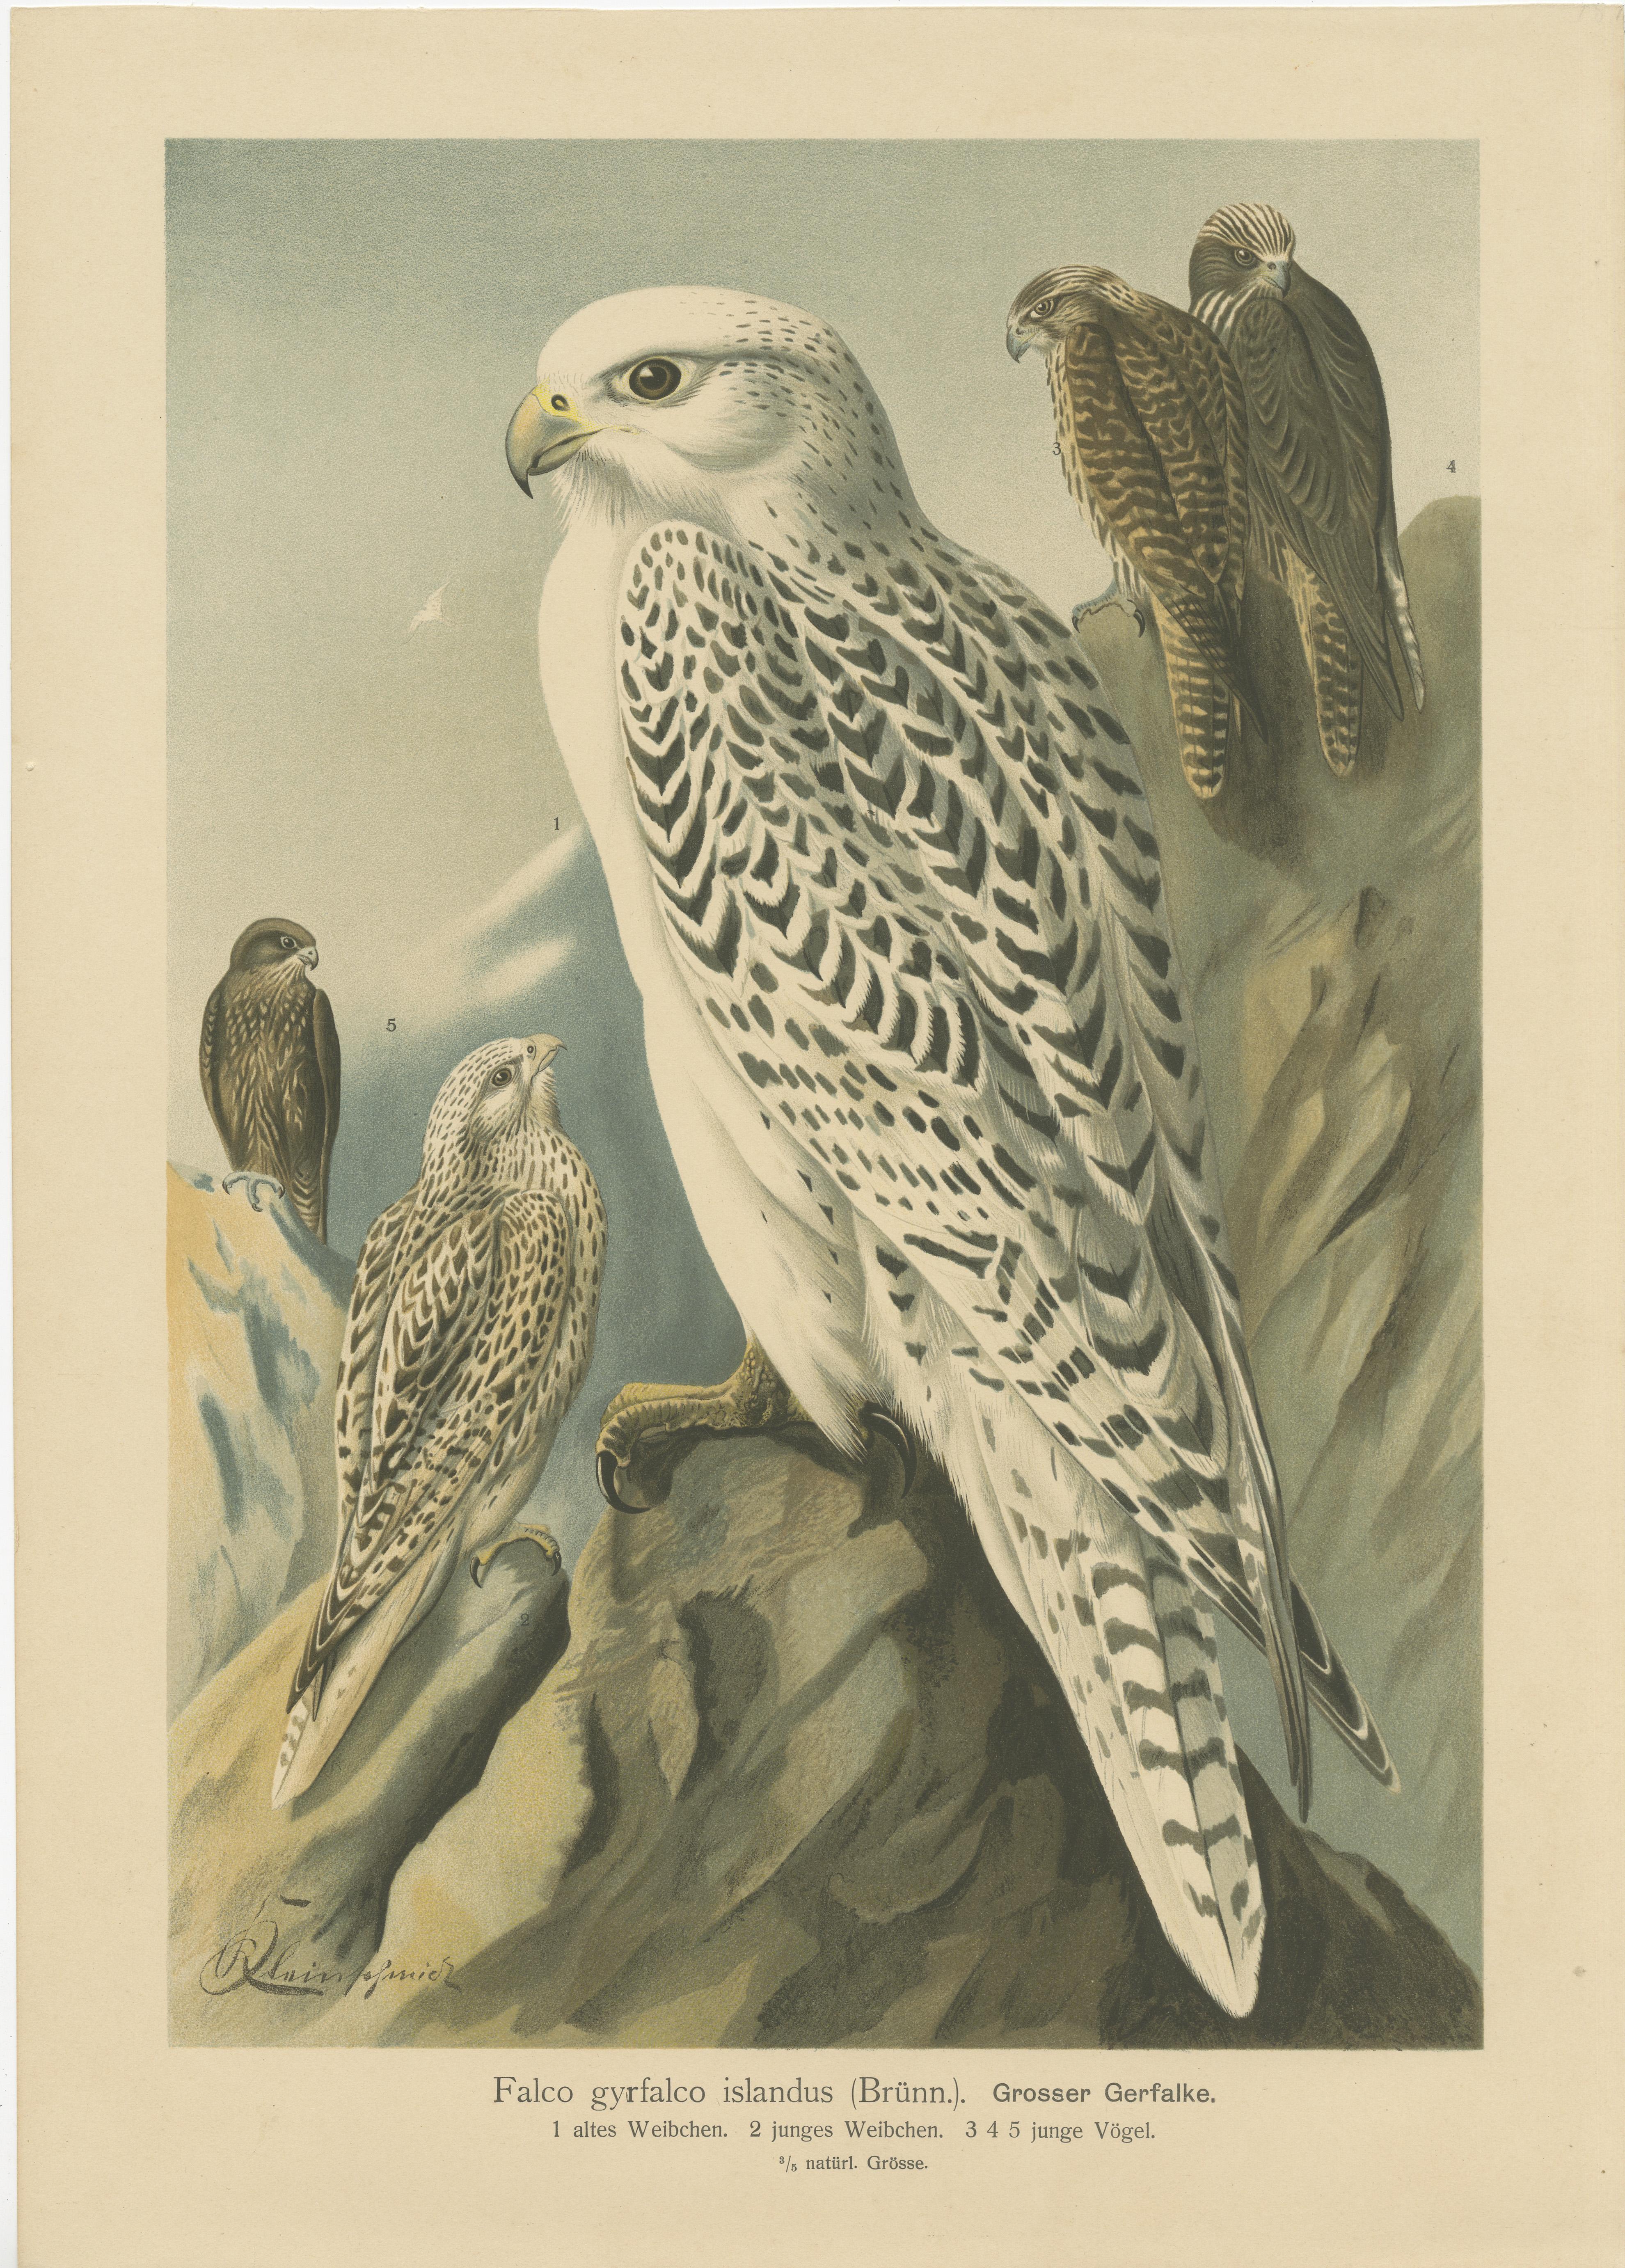 The birds featured in the collage are all falcons, specifically:

1. The first print depicts the Gyrfalcon (Falco rusticolus), showcasing various life stages or morphs of the species.

2. The second print continues with the Gyrfalcon theme,